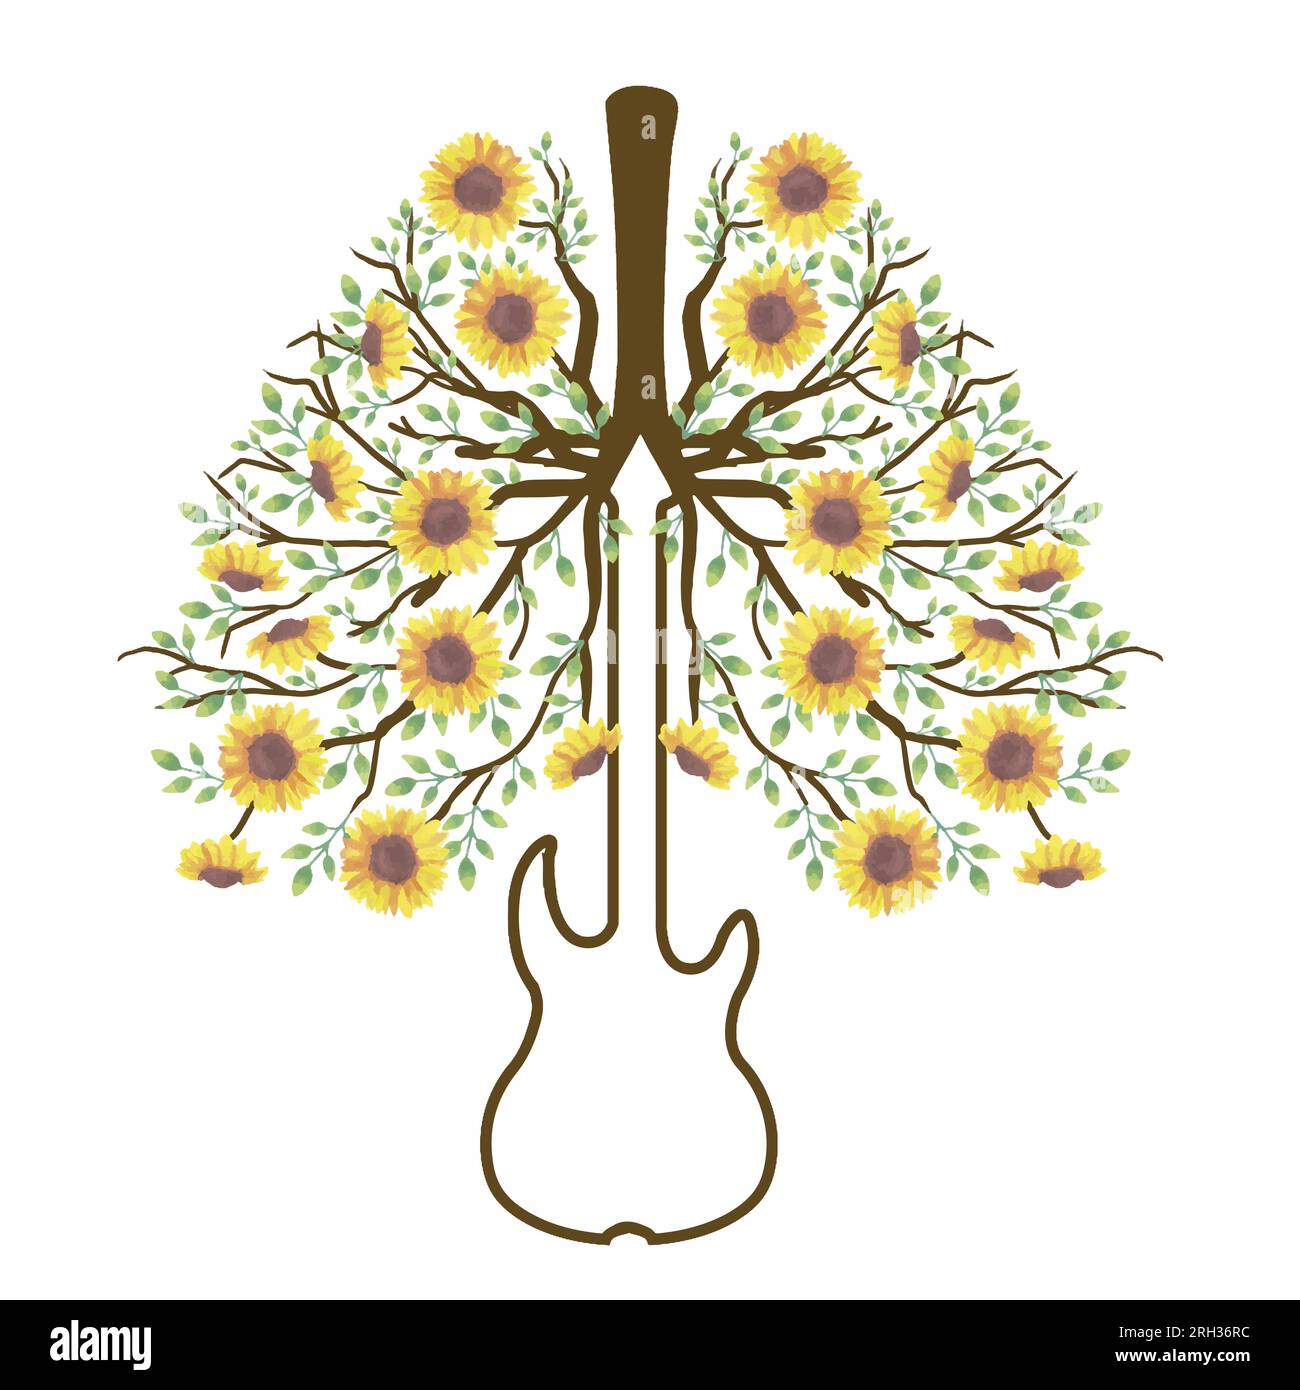 Guitar with yellow sunflower forming healthy lungs and bronchial tree organ anatomy Stock Vector